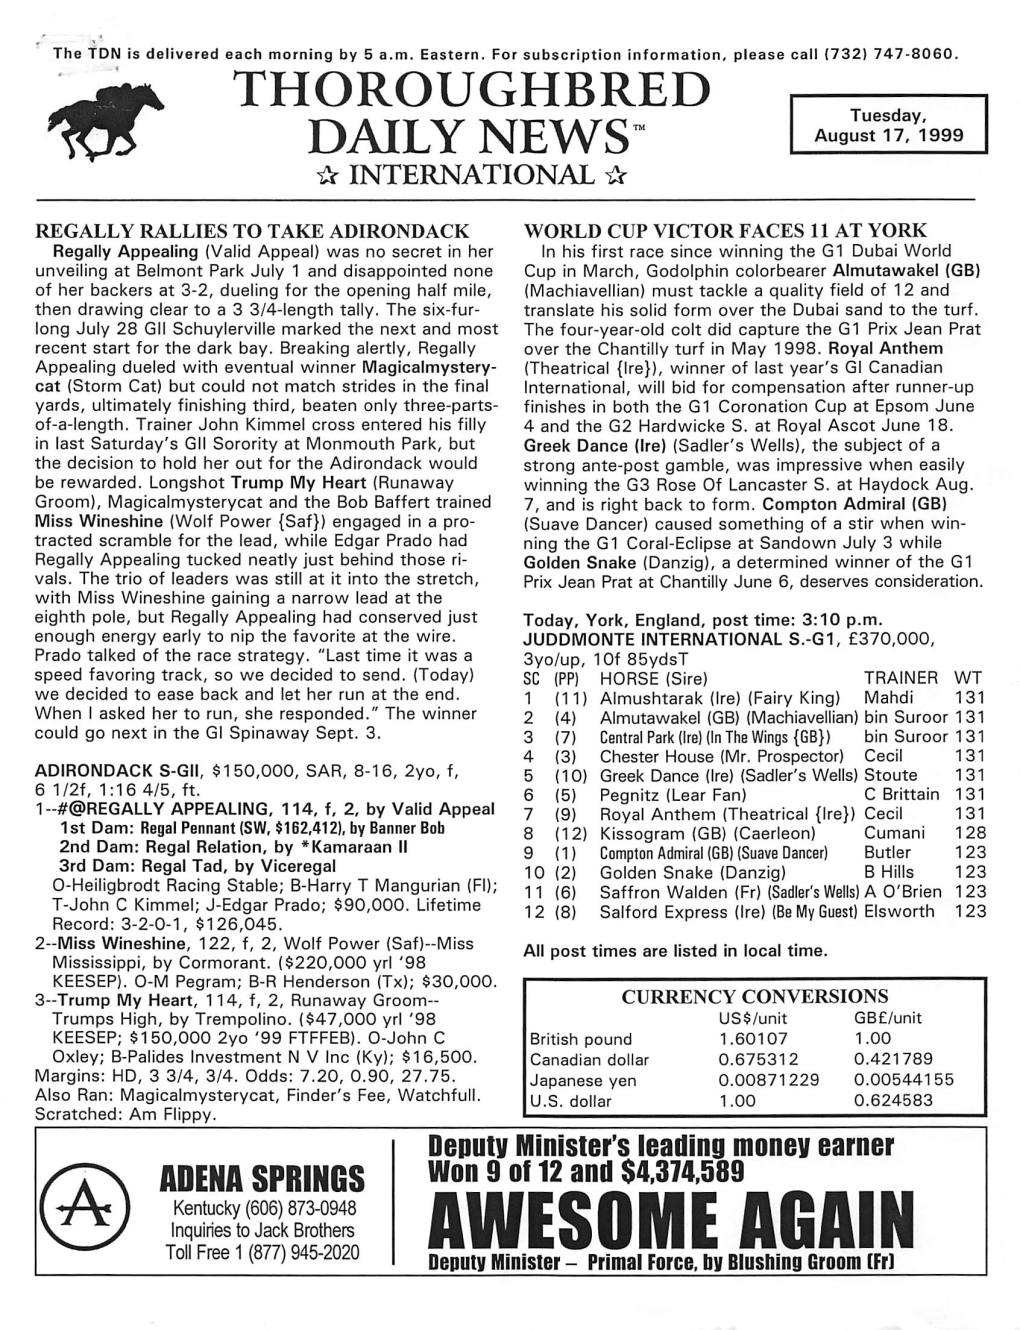 AWESOME AGAIN Deputy Minister - Primai Force, by Biushing Groom (Frl TDN Tv INTERNATIONAL * 8/17/99 * PAGE 2